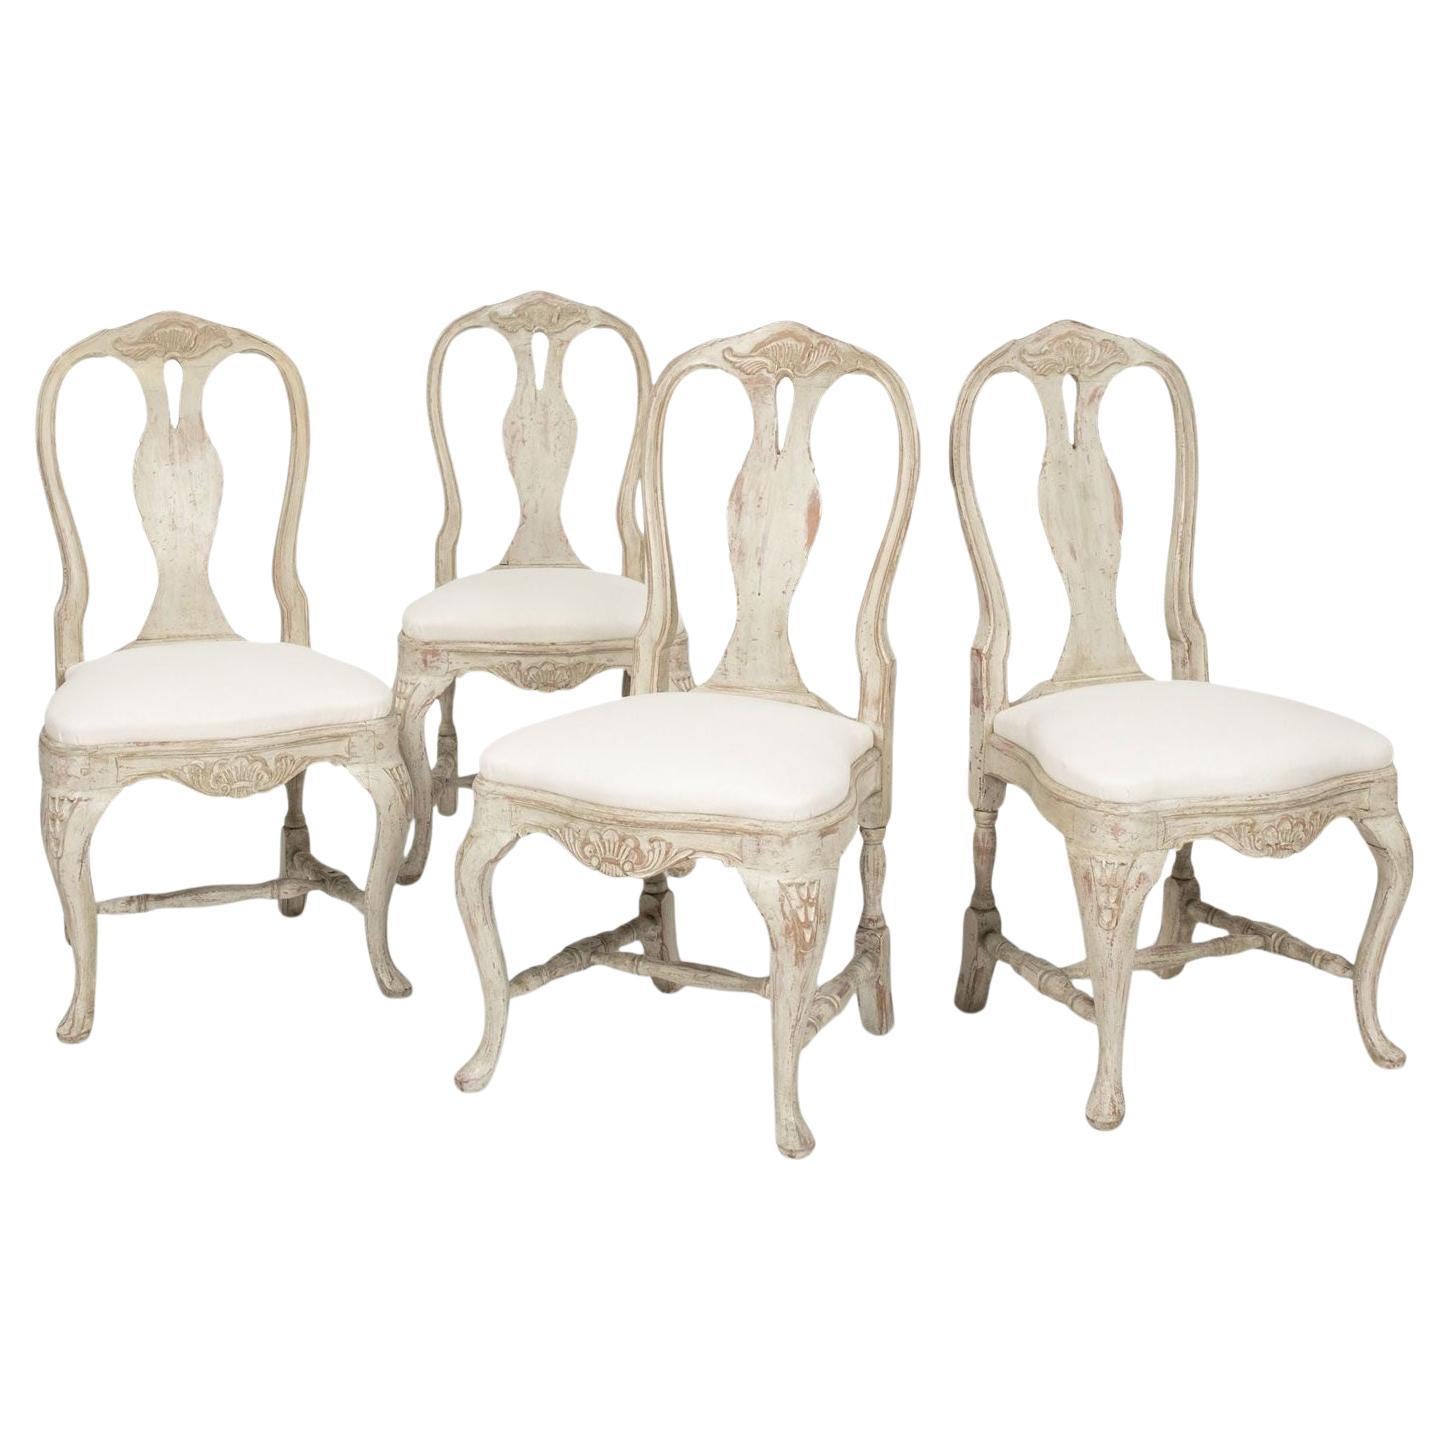 Set of Four Painted Swedish Rococo Chairs